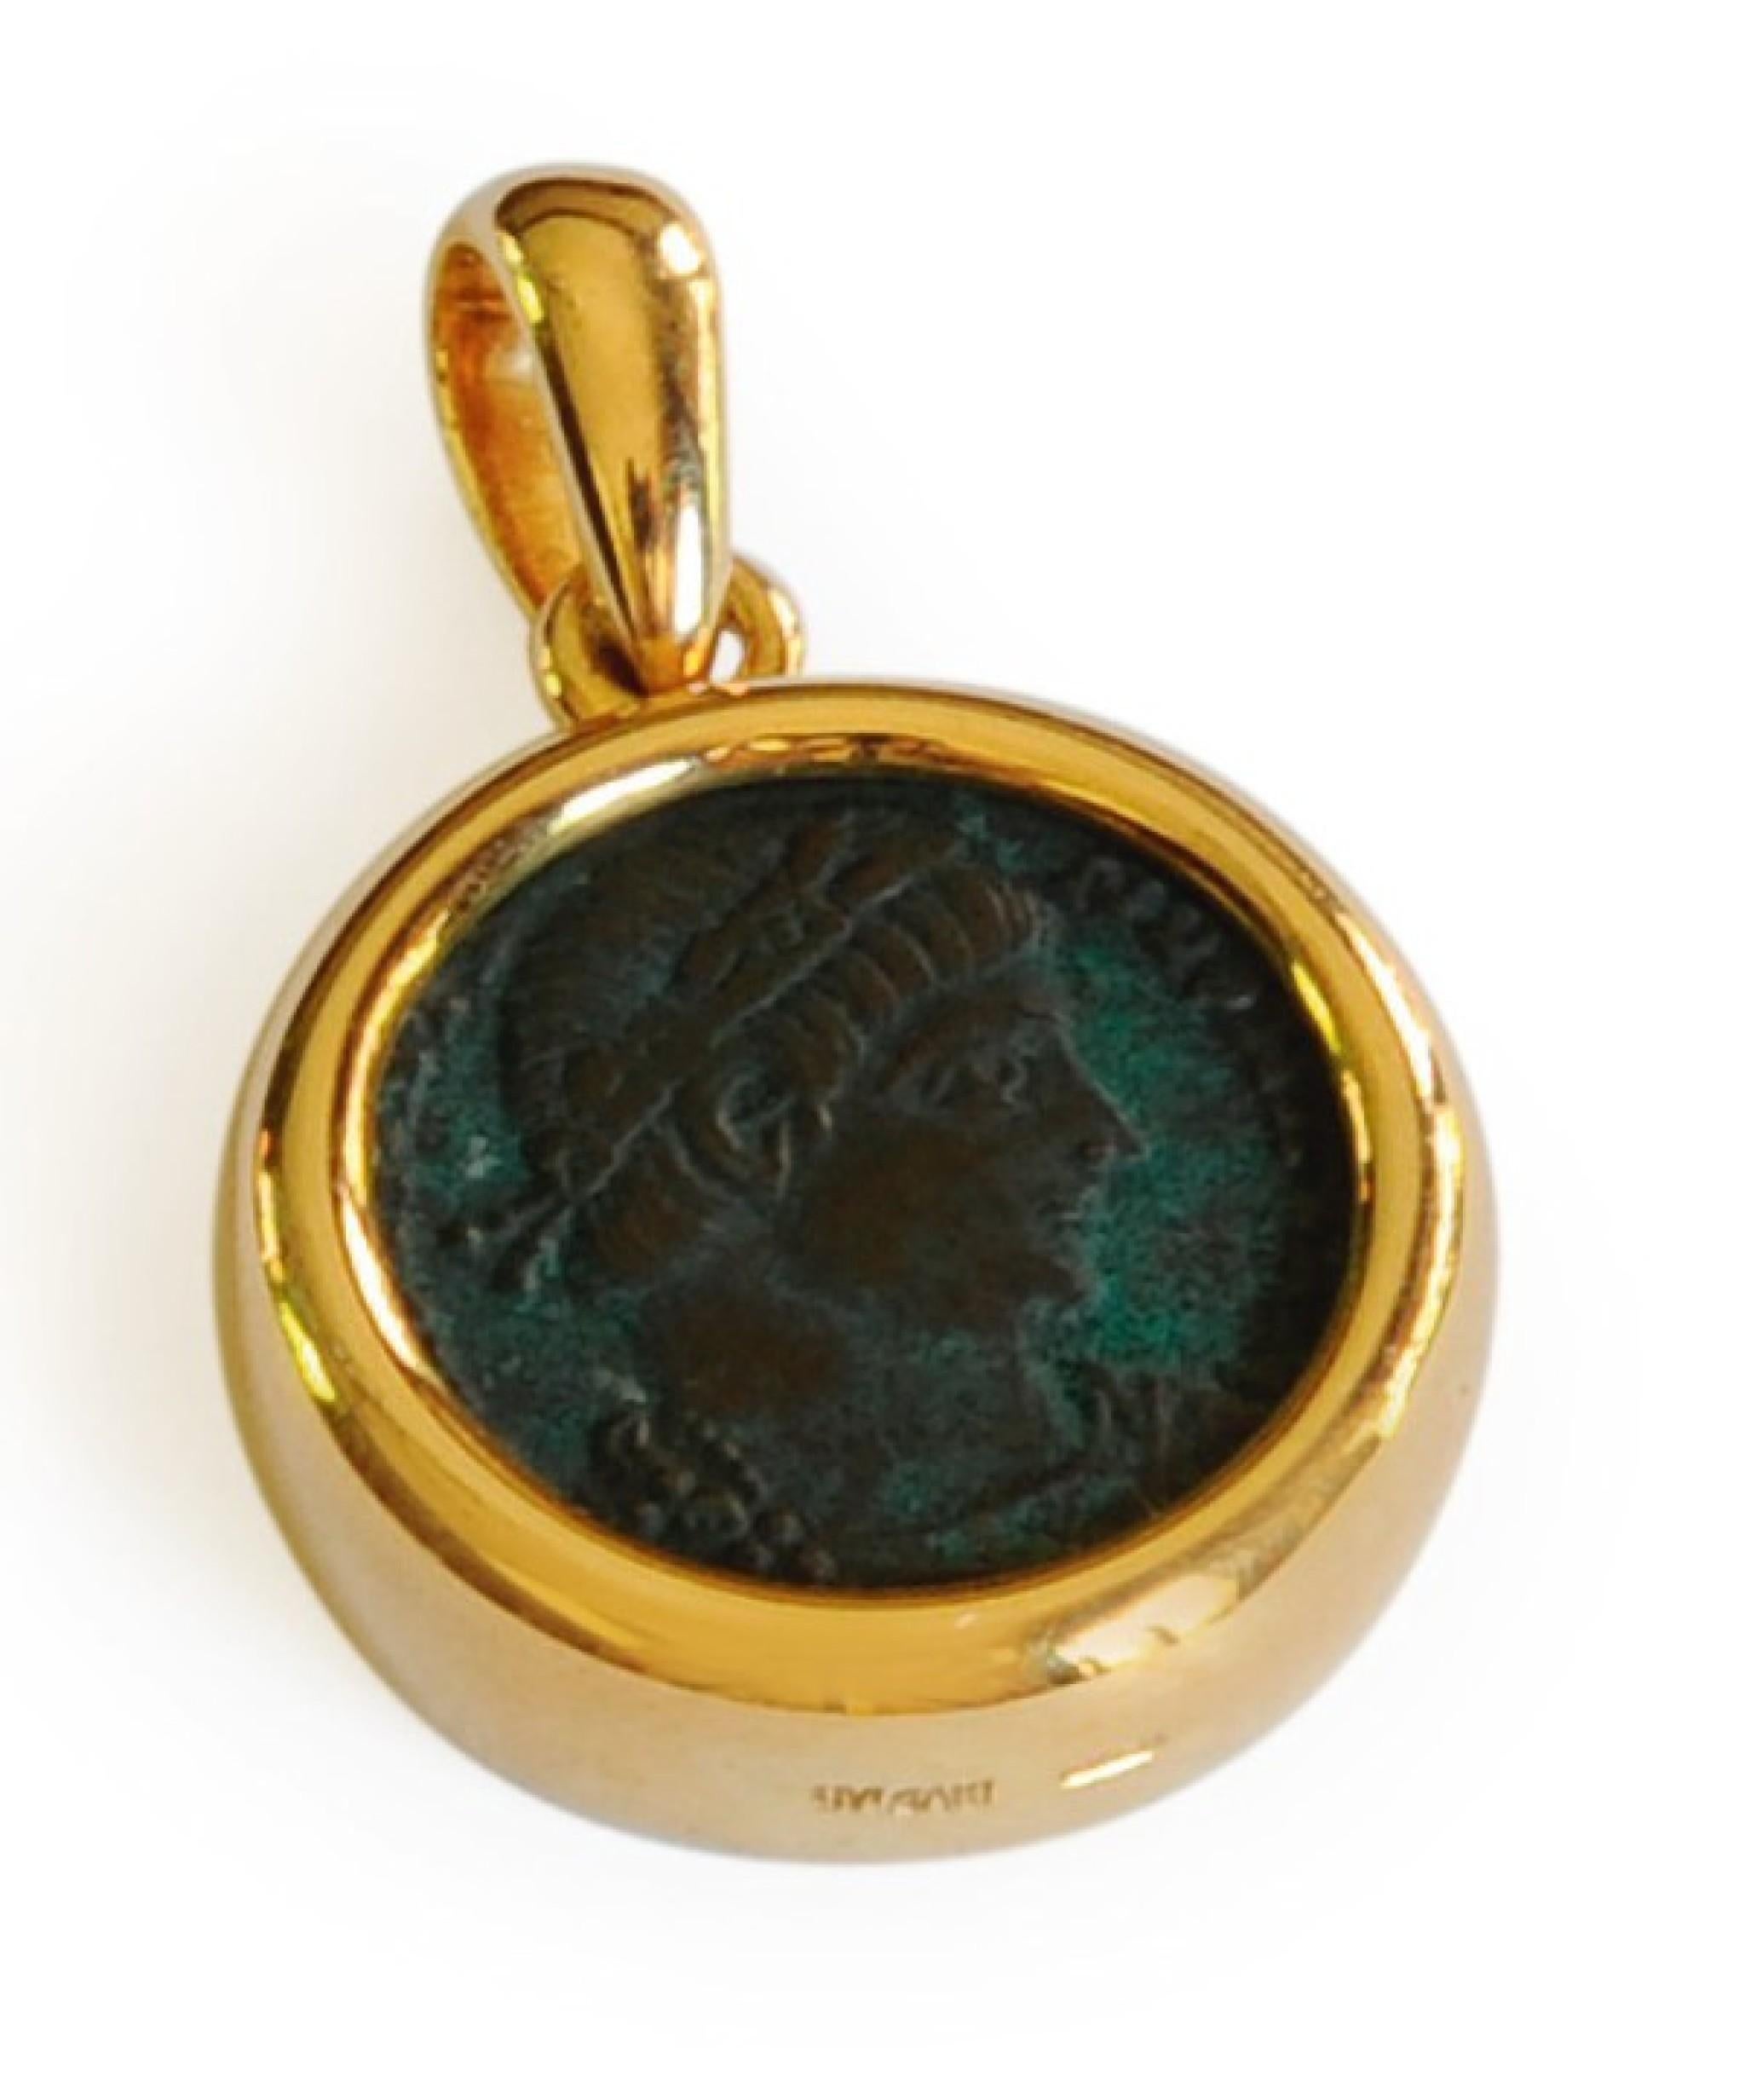 A classic Bulgari Monete piece featuring an ancient bronze Roman coin inscribed ‘Rome Constantinus I Aug. A.D. 307-337’ suspended from a two-color 18 karat gold braided necklace. Internal circumference 14½ inches. Made in Italy.